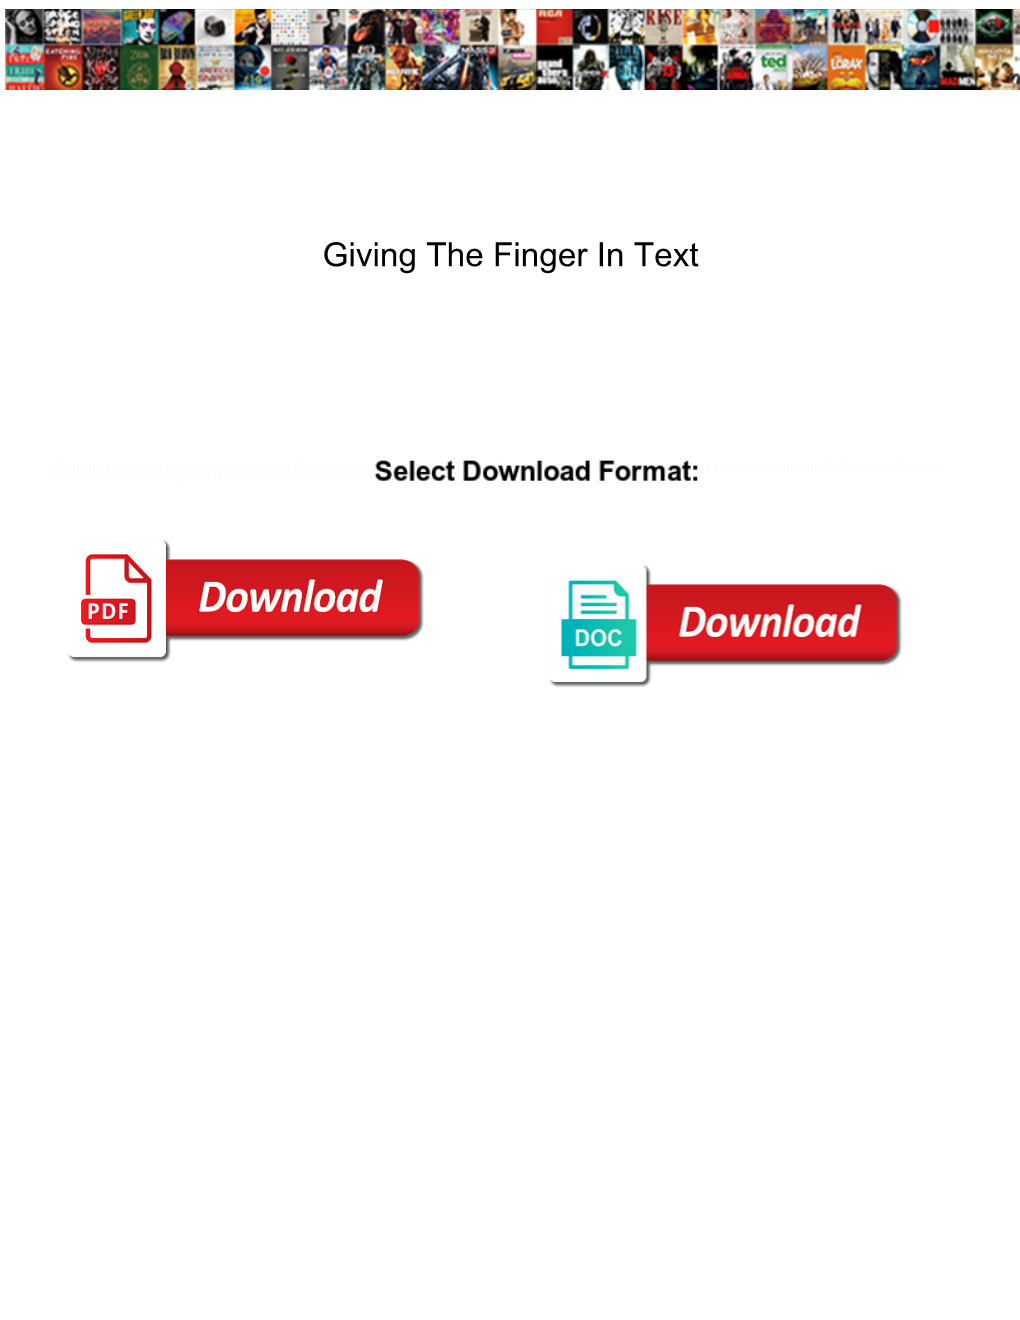 Giving the Finger in Text